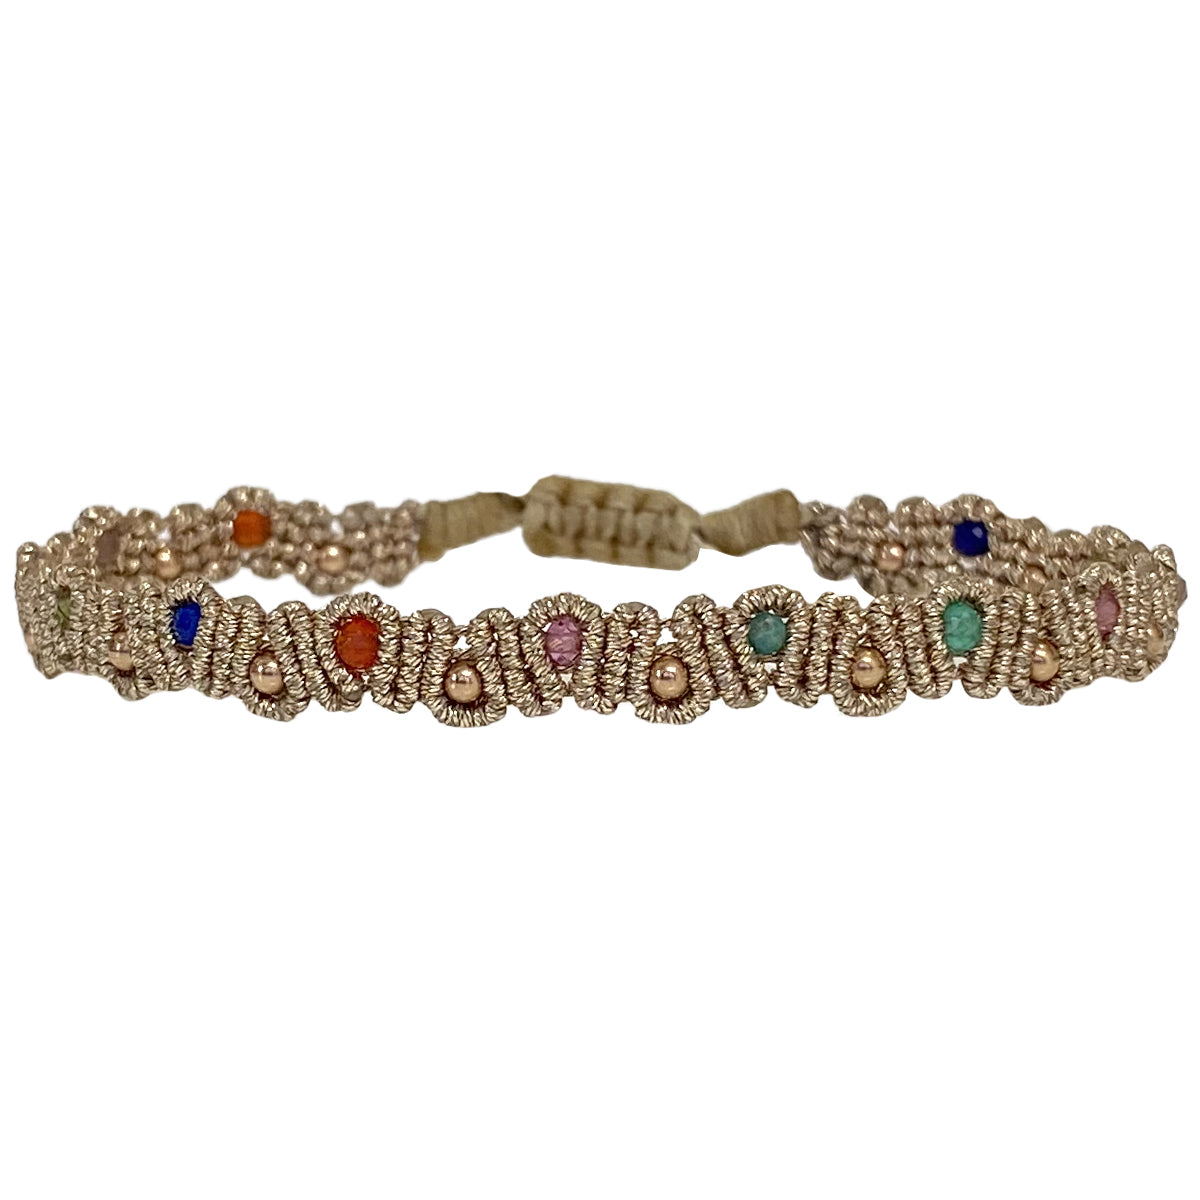 If you wish for simple elegance and versatility this handmade bracelet is just for you. It is handwoven by our team of artisans using intermixed semi-precious stones, 14K rose gold filled beads and metallic threads.  Details:  - Women bracelet  - Rose gold filled beads  - Semi precious stones  -Adjustable bracelet  -Width: 5mm  -Can be worn in the water